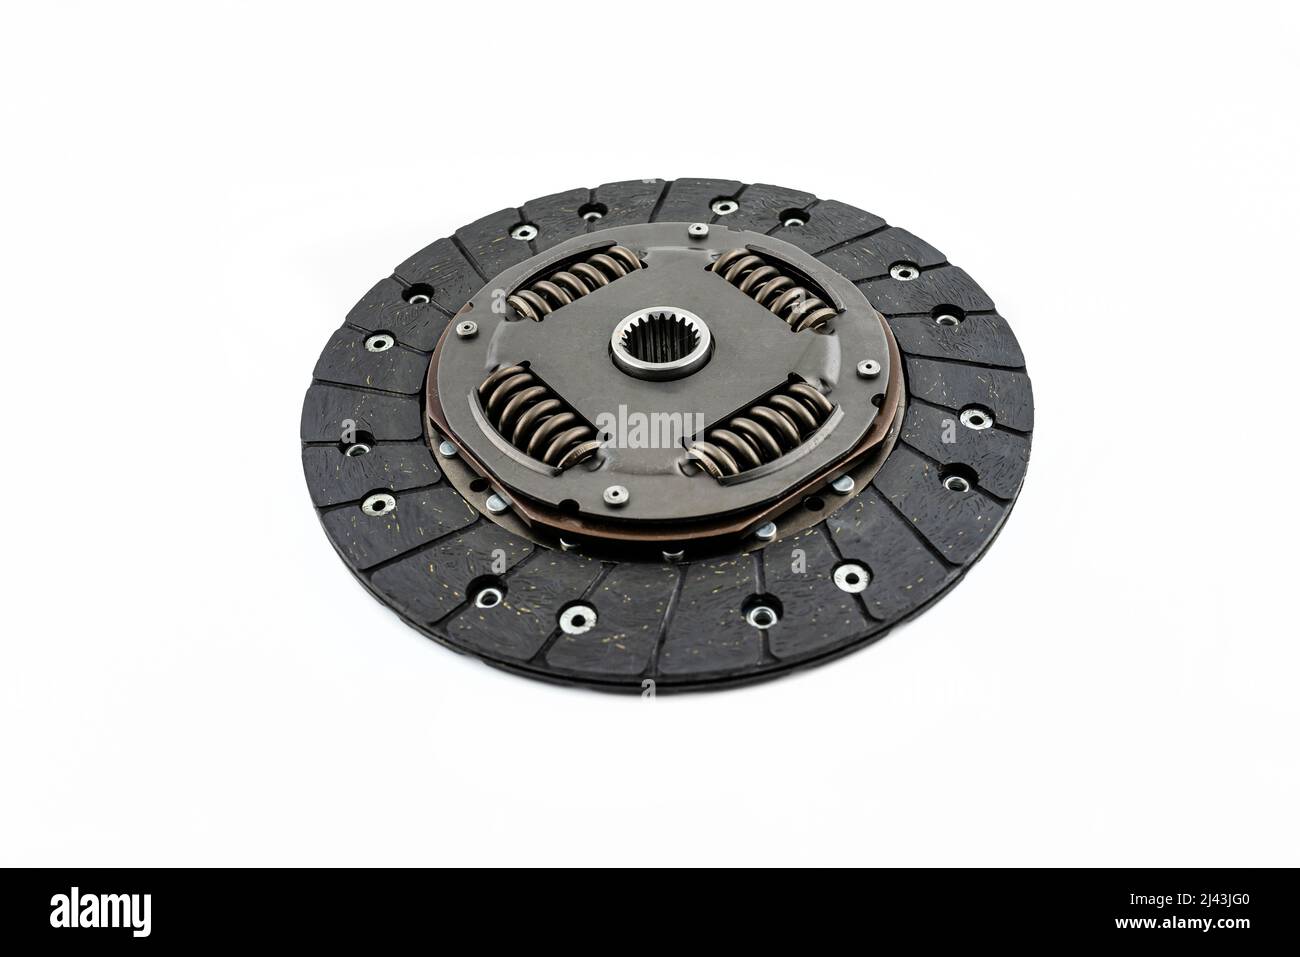 Used car clutch with damper springs and friction linings, isolated on a white background. Stock Photo